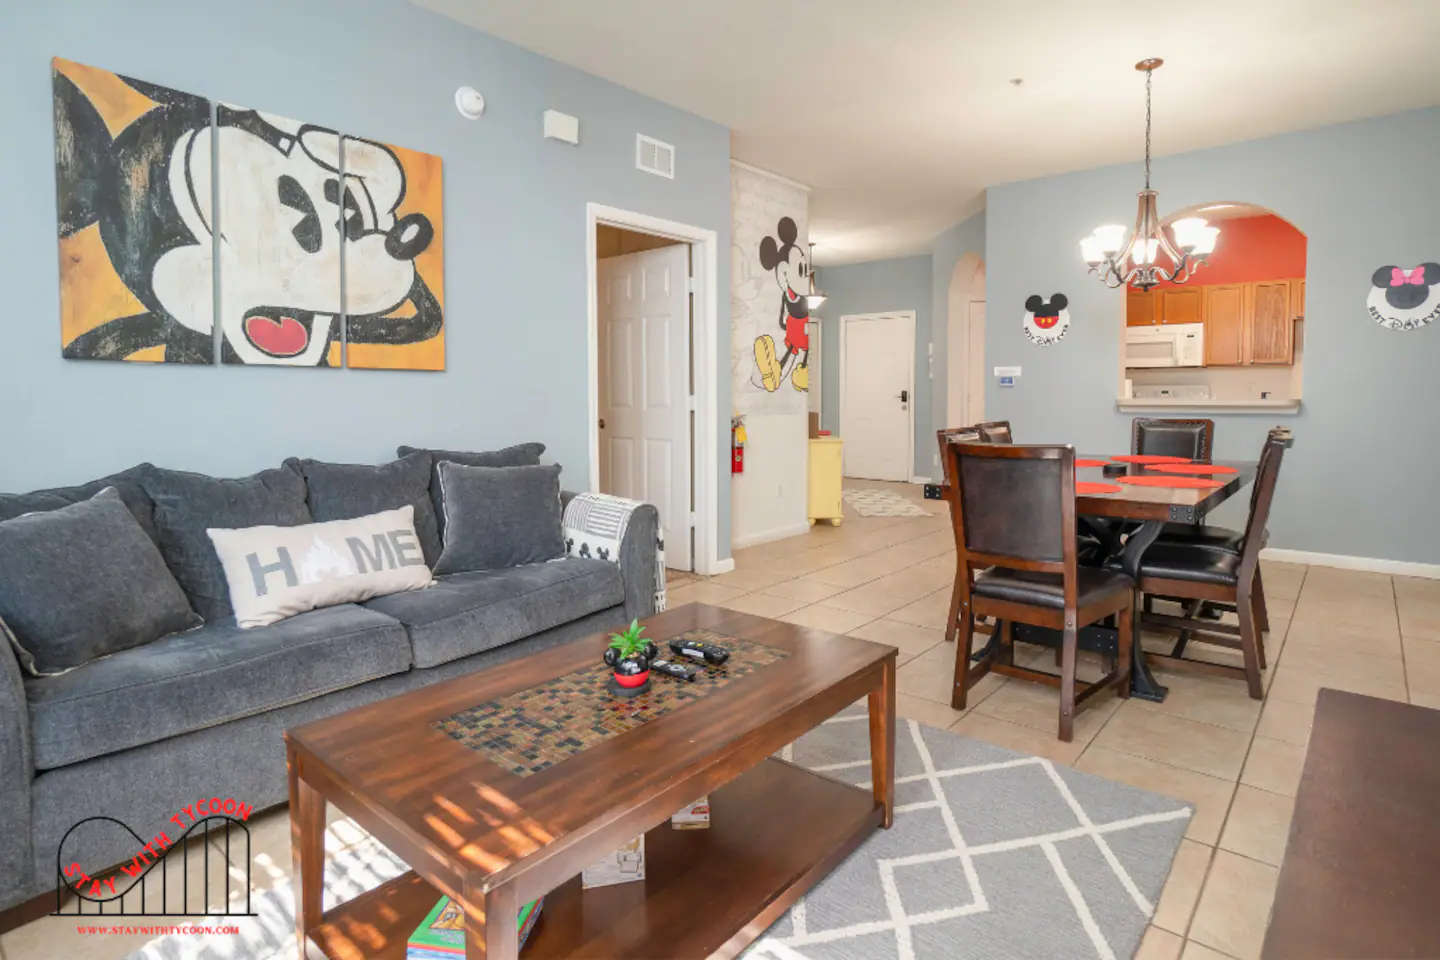 Living room with a Mickey Mouse motif!